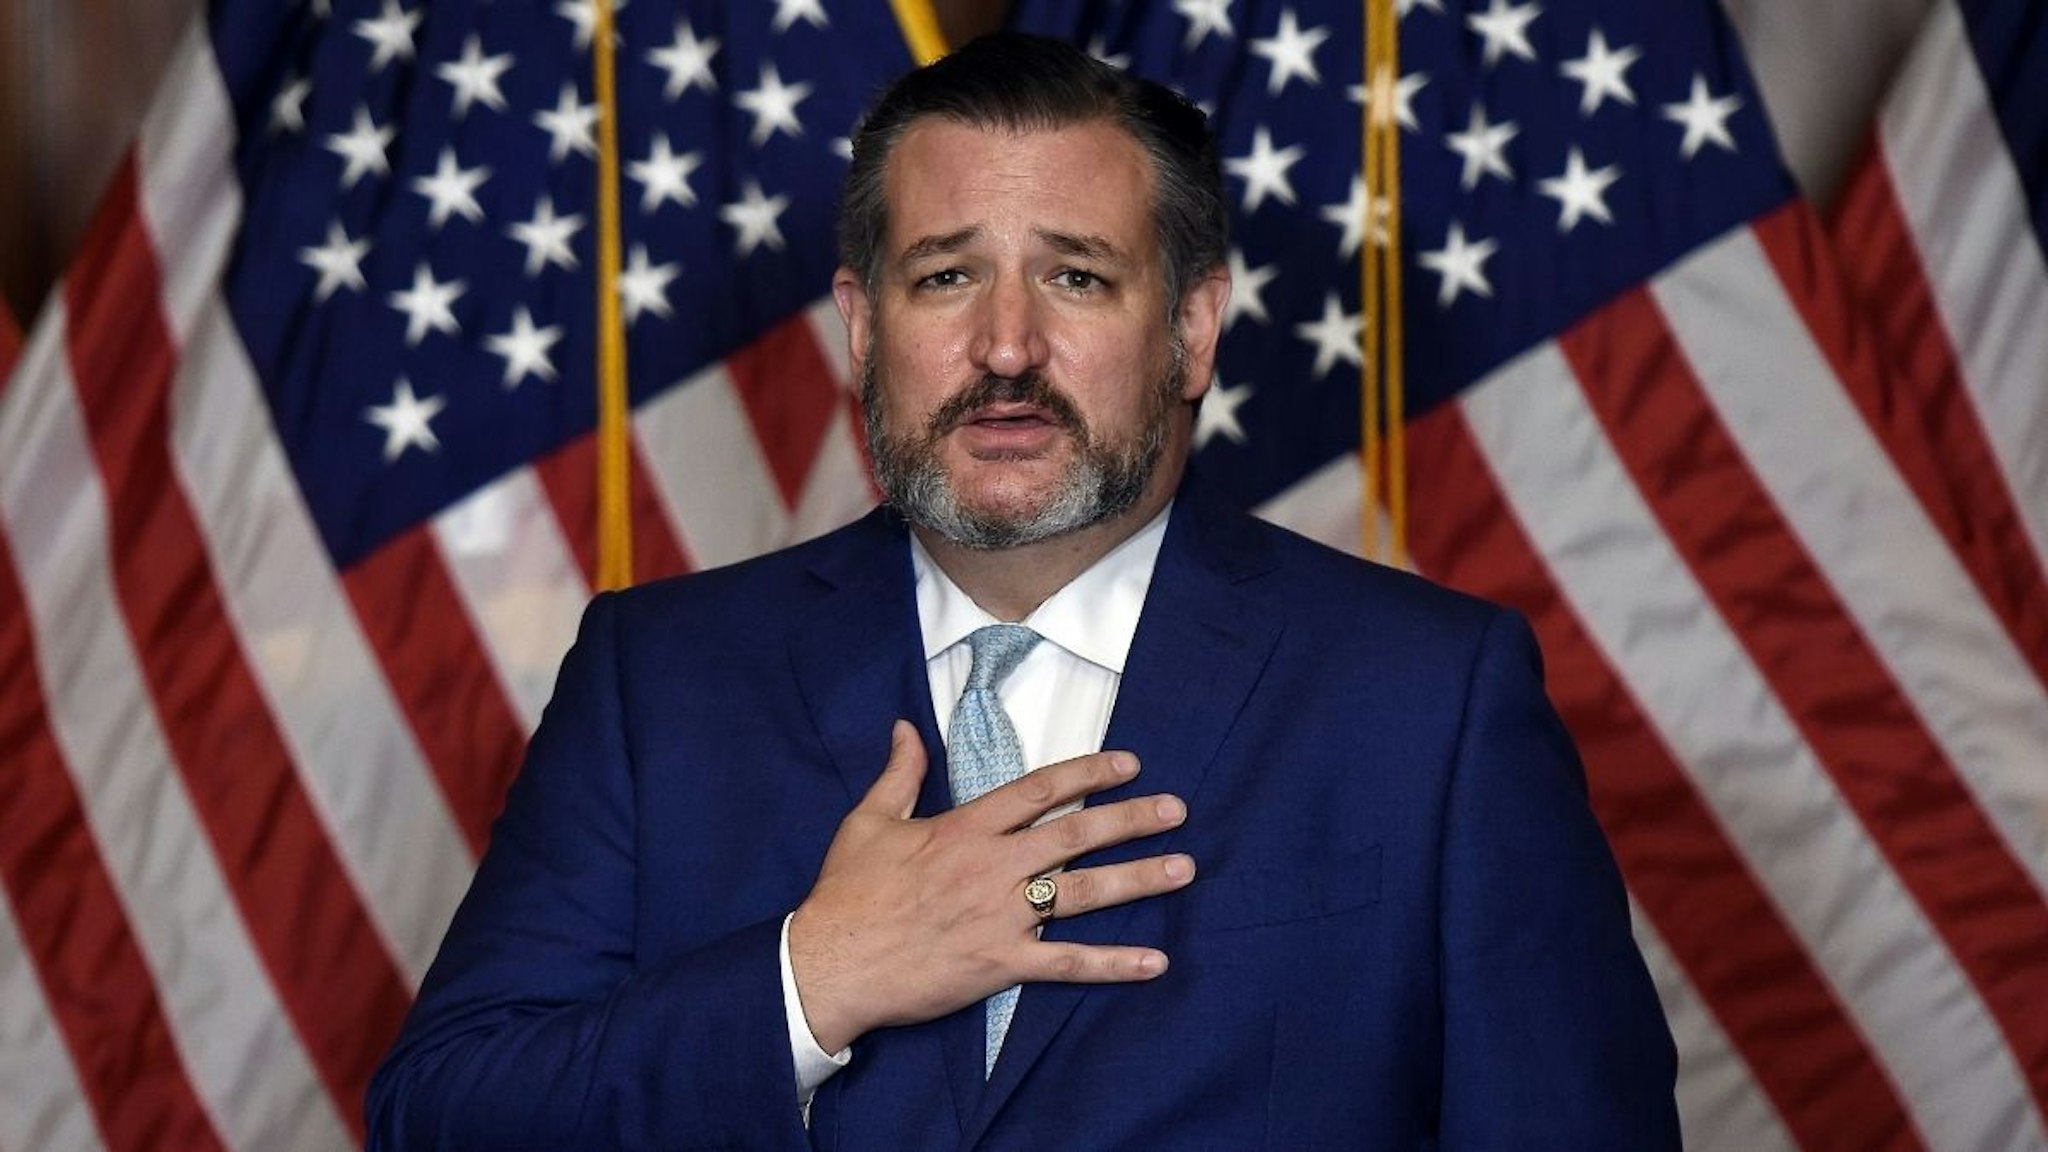 Republican Senator Ted Cruz (R-TX) speaks during a press conference after Supreme Court nominee Judge Amy Coney Barrett was confirmed by the Senate as the 115th justice to the Supreme Court on Capitol Hill, October 26, 2020 in Washington, DC.